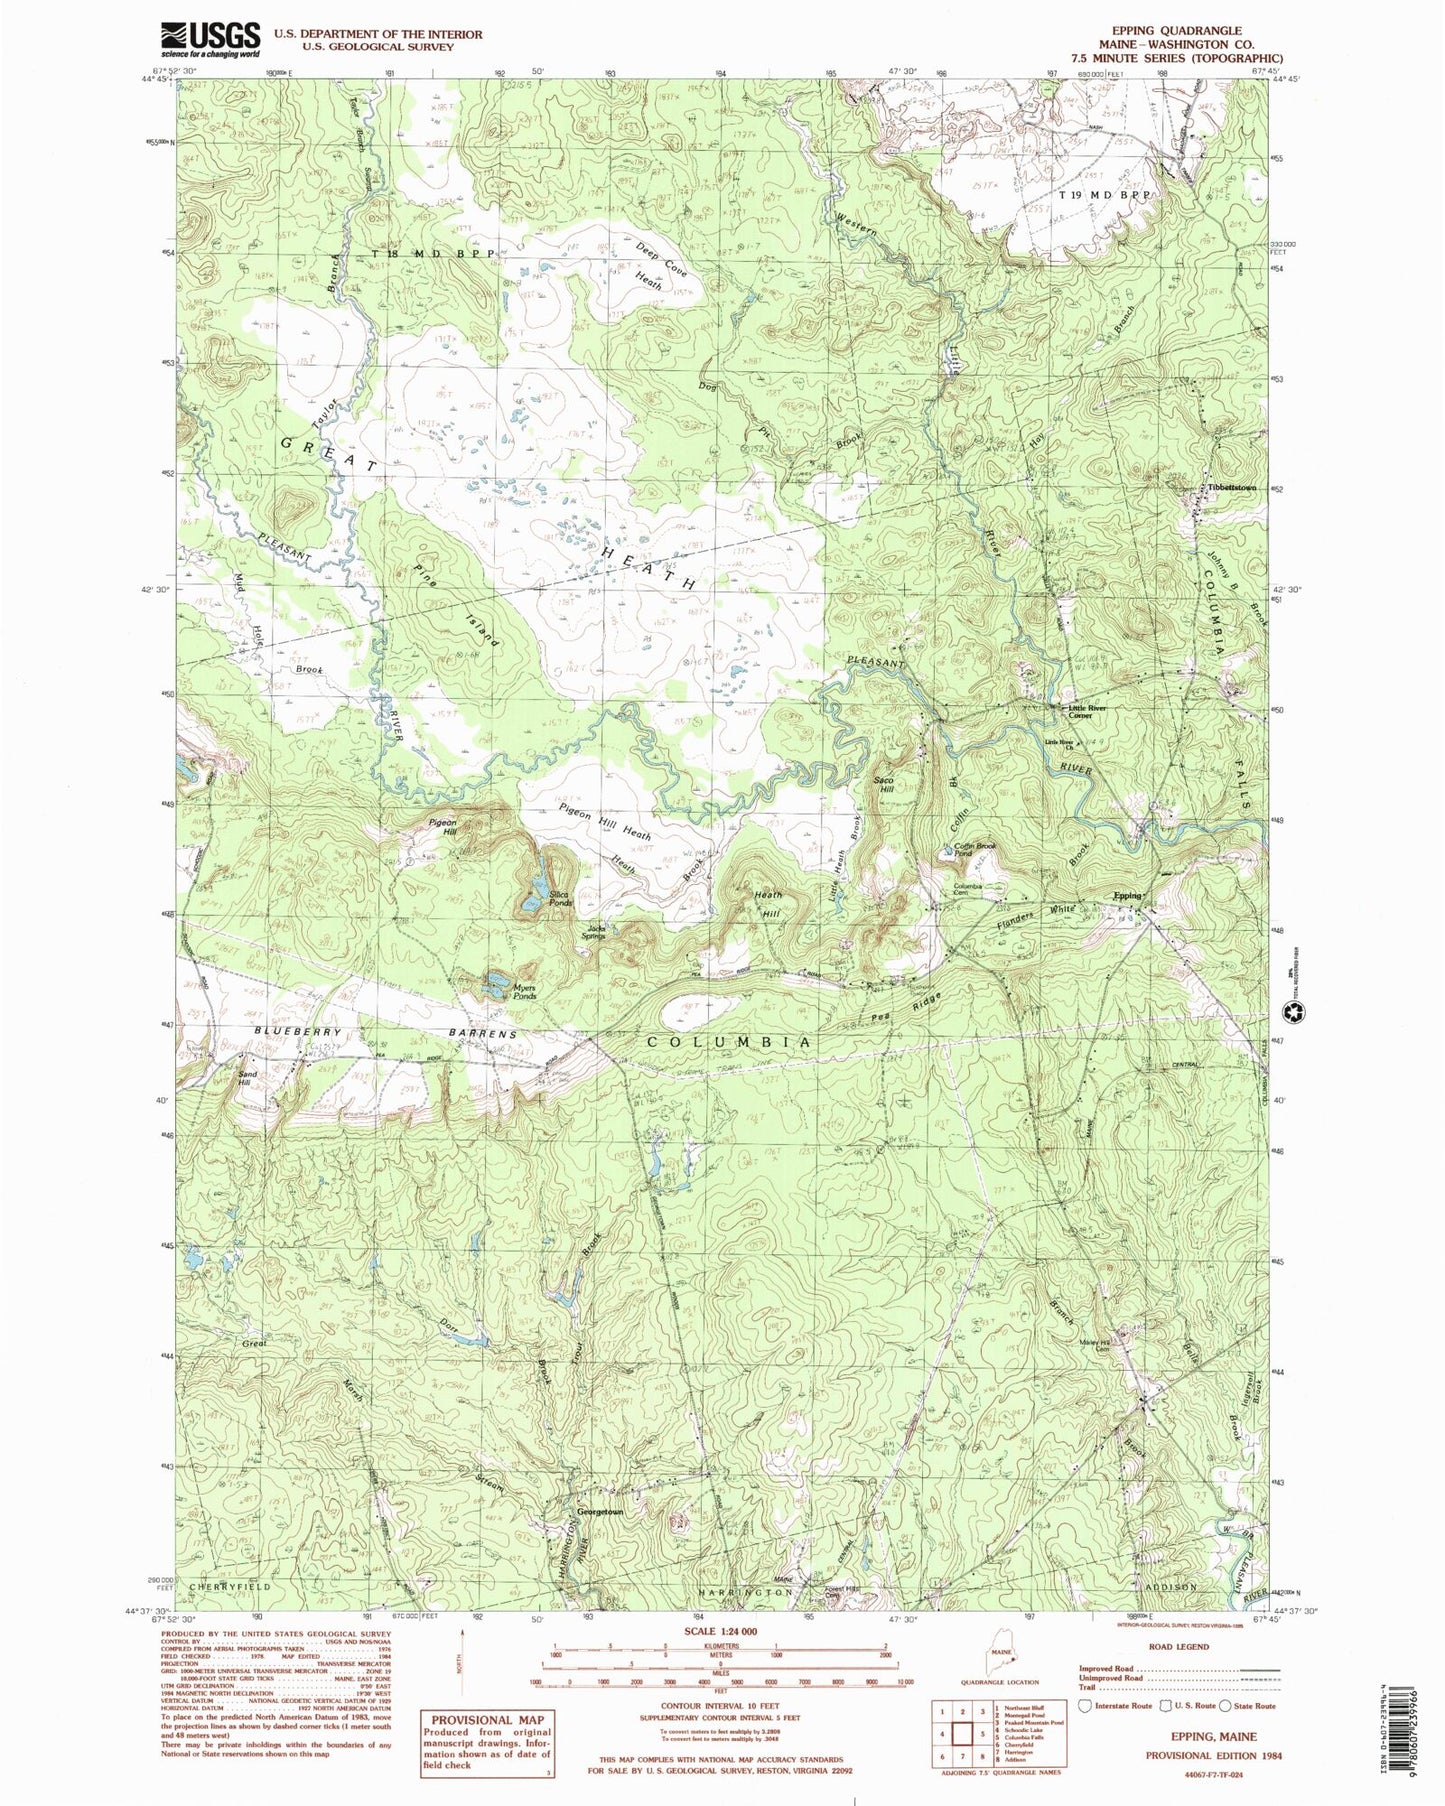 Classic USGS Epping Maine 7.5'x7.5' Topo Map Image